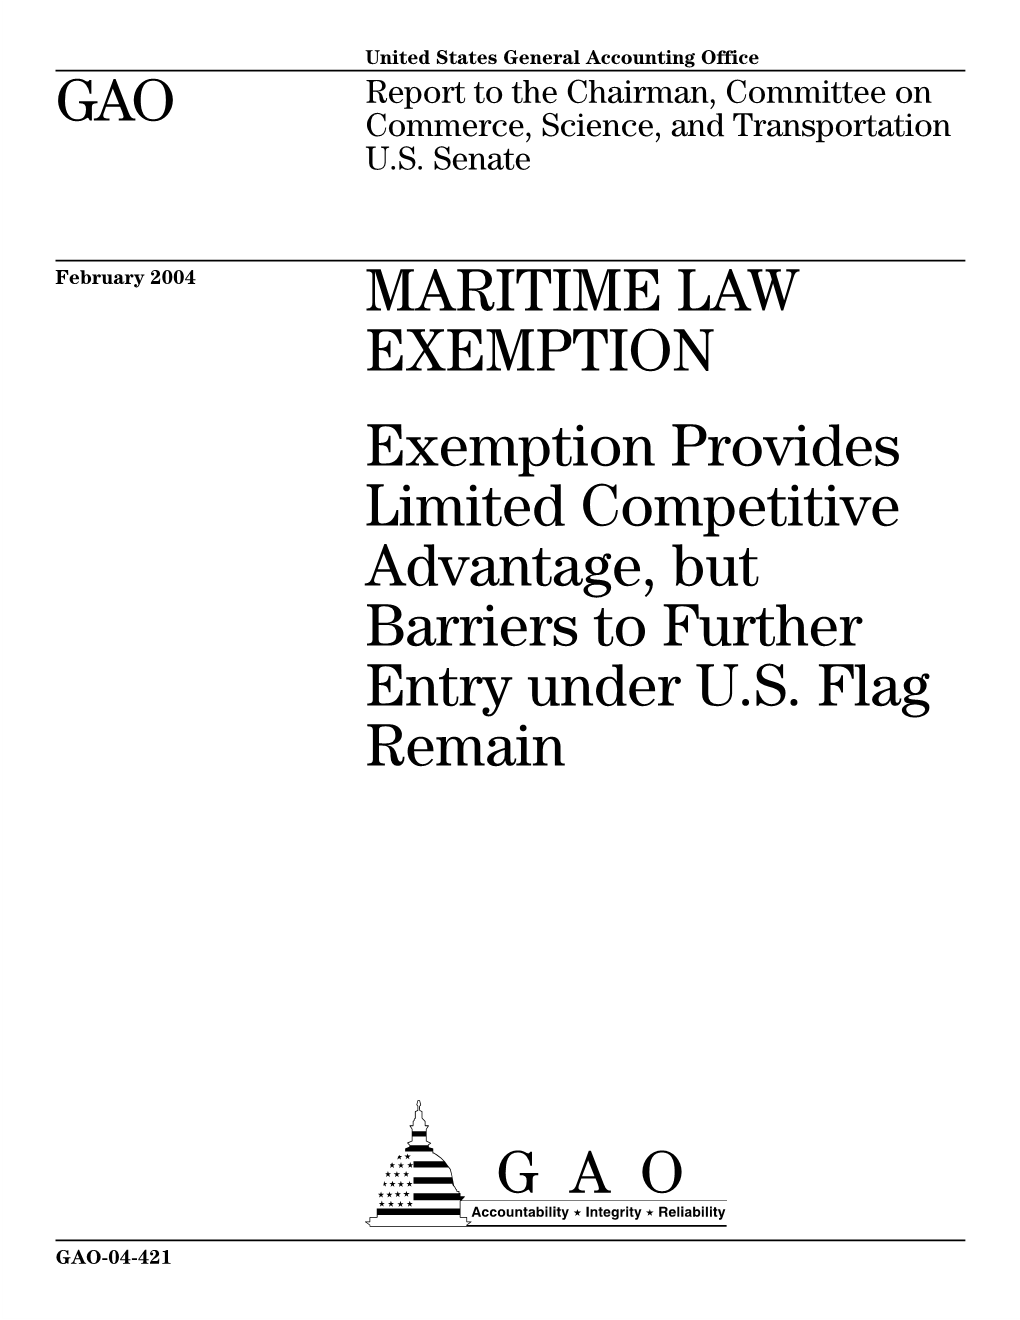 GAO-04-421 Maritime Law Exemption